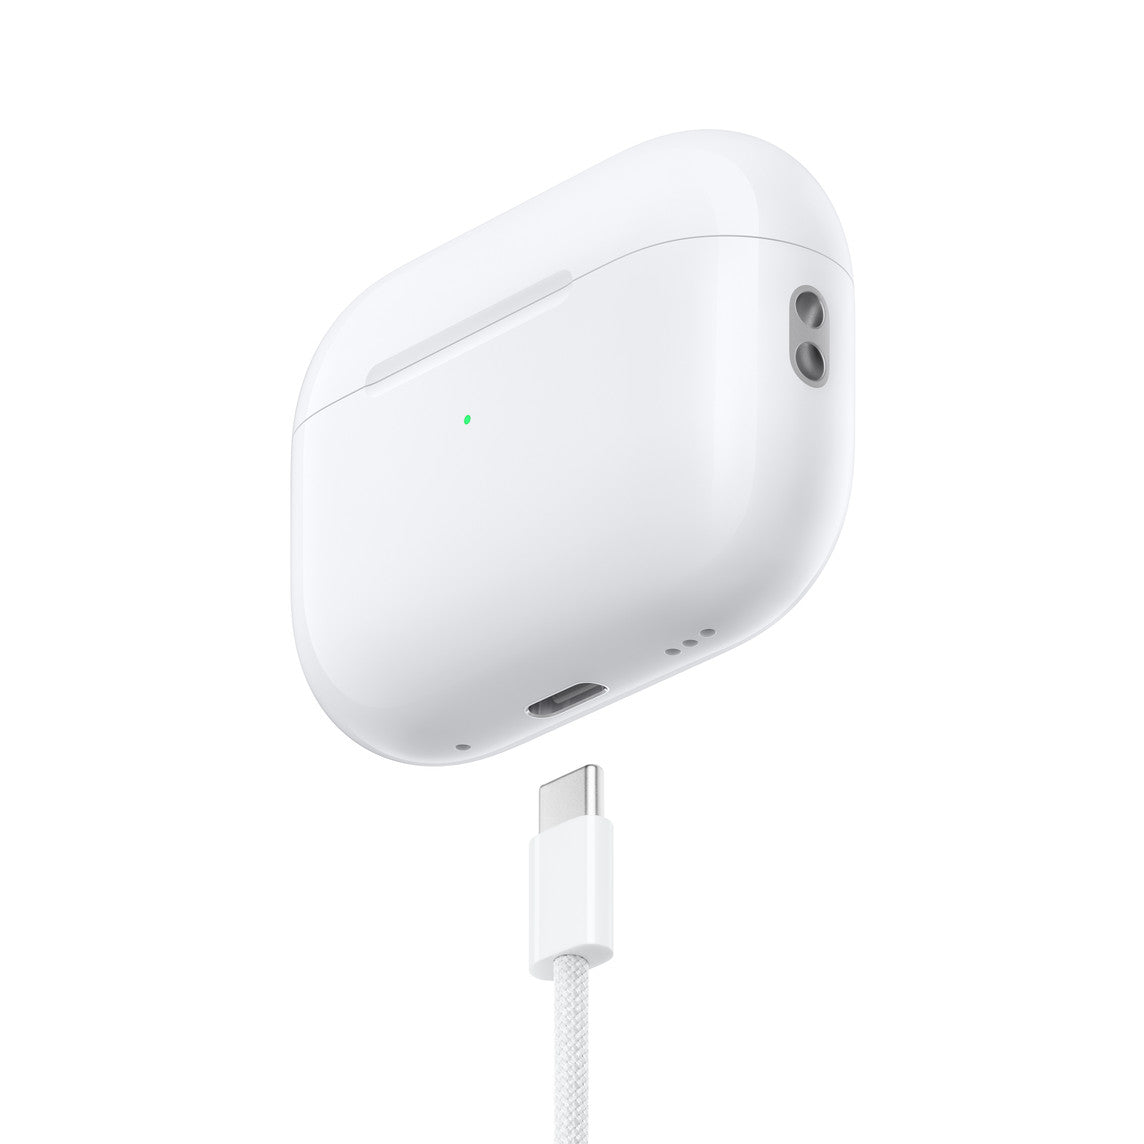 Apple AirPods Pro AirPods Pro (2nd generation) with MagSafe Charging Case (USB‑C)( Coming Soon )